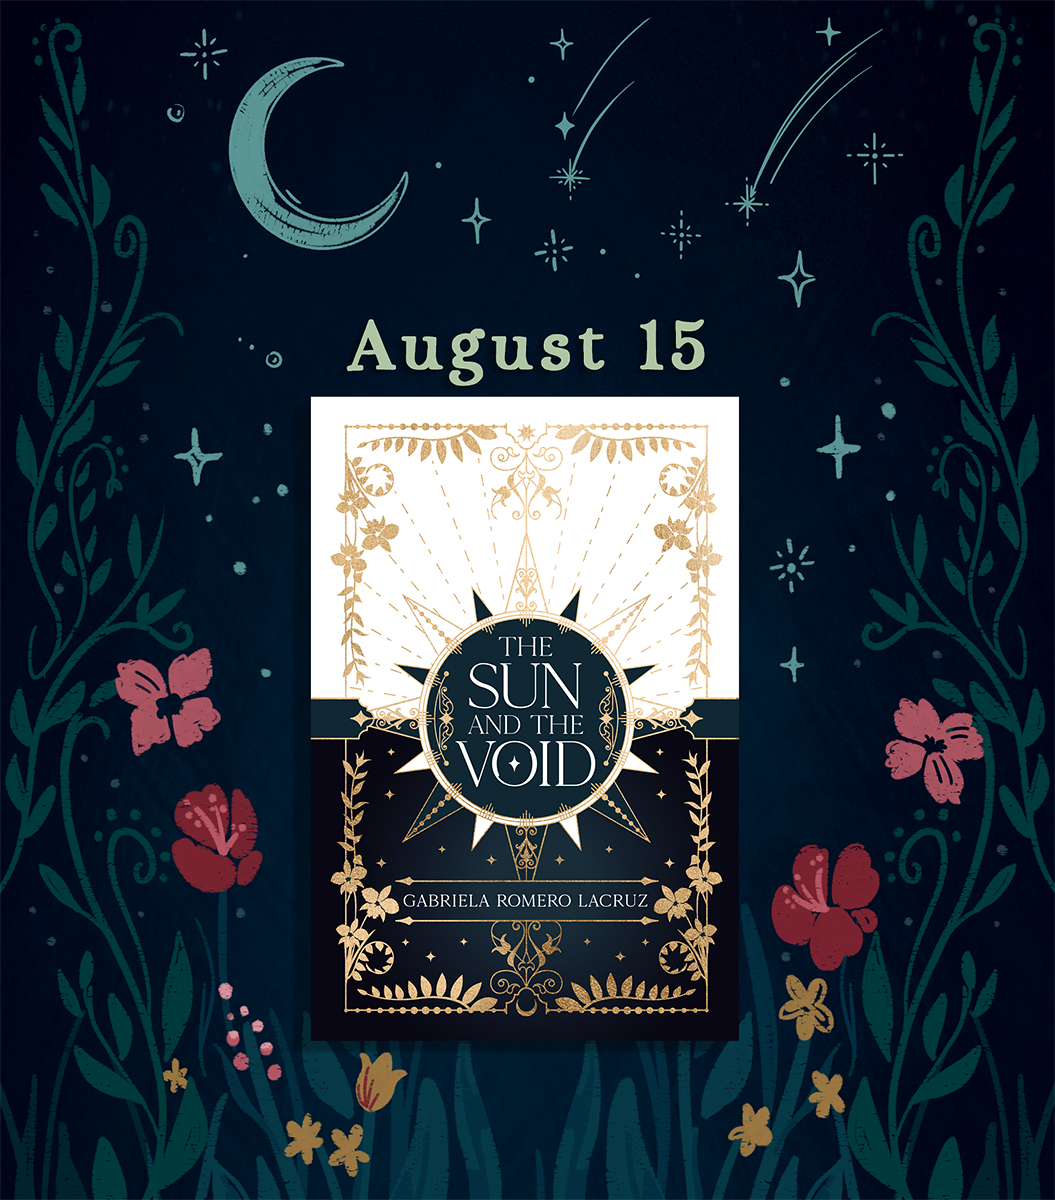 New UK release date! 🌺✨ Due to some printing delays, The Sun and the Void will now be releasing on August 15 in the UK! The day is near!!! I'm excited!